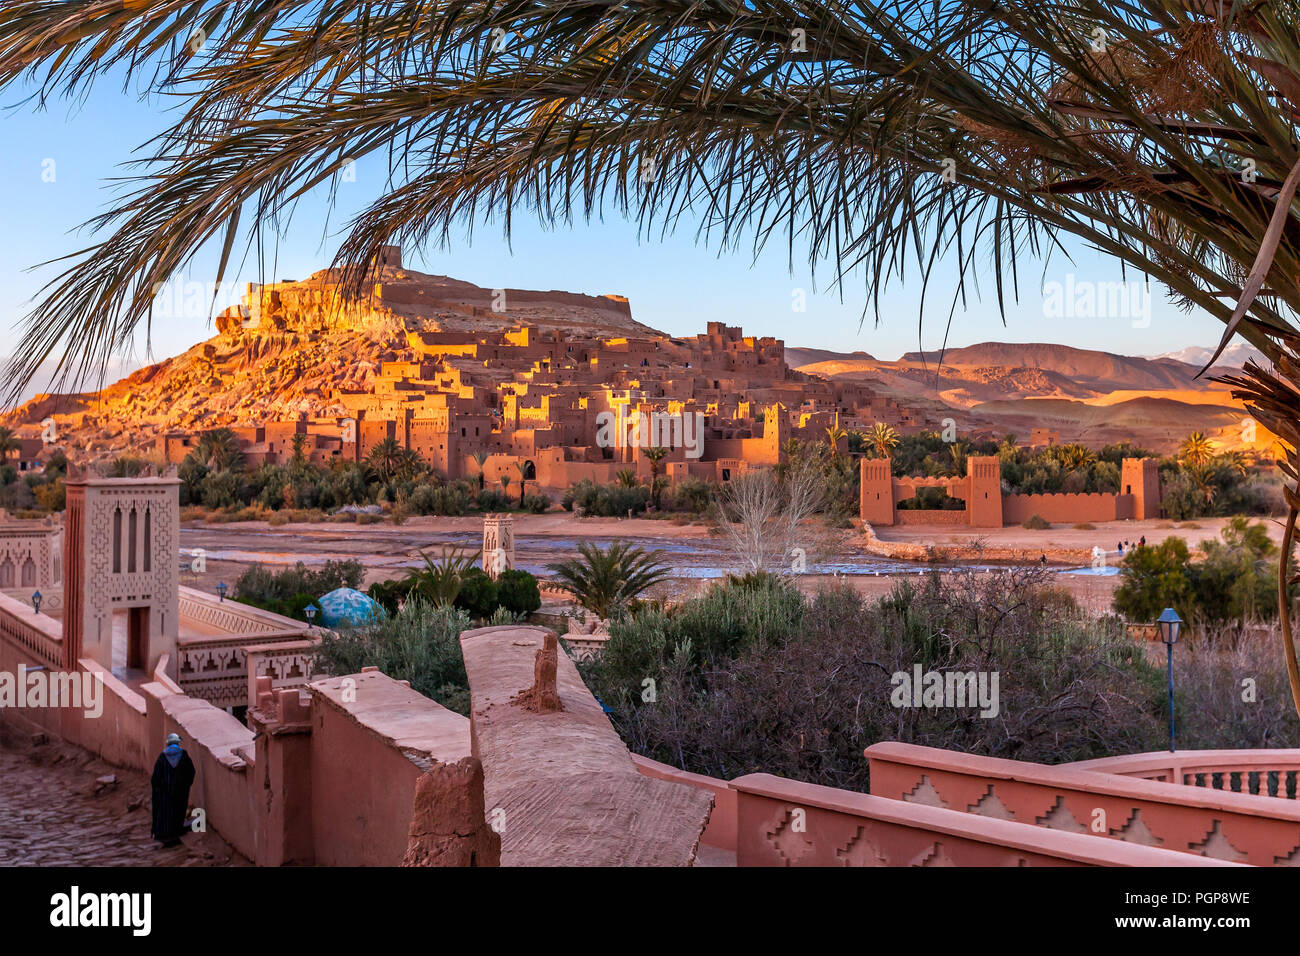 Morocco view of famous kasbah framed by palm tree fronds. Dozens of movies have been filmed at Ait Benhaddou, including scenes in Lawrence of Arabia. Stock Photo